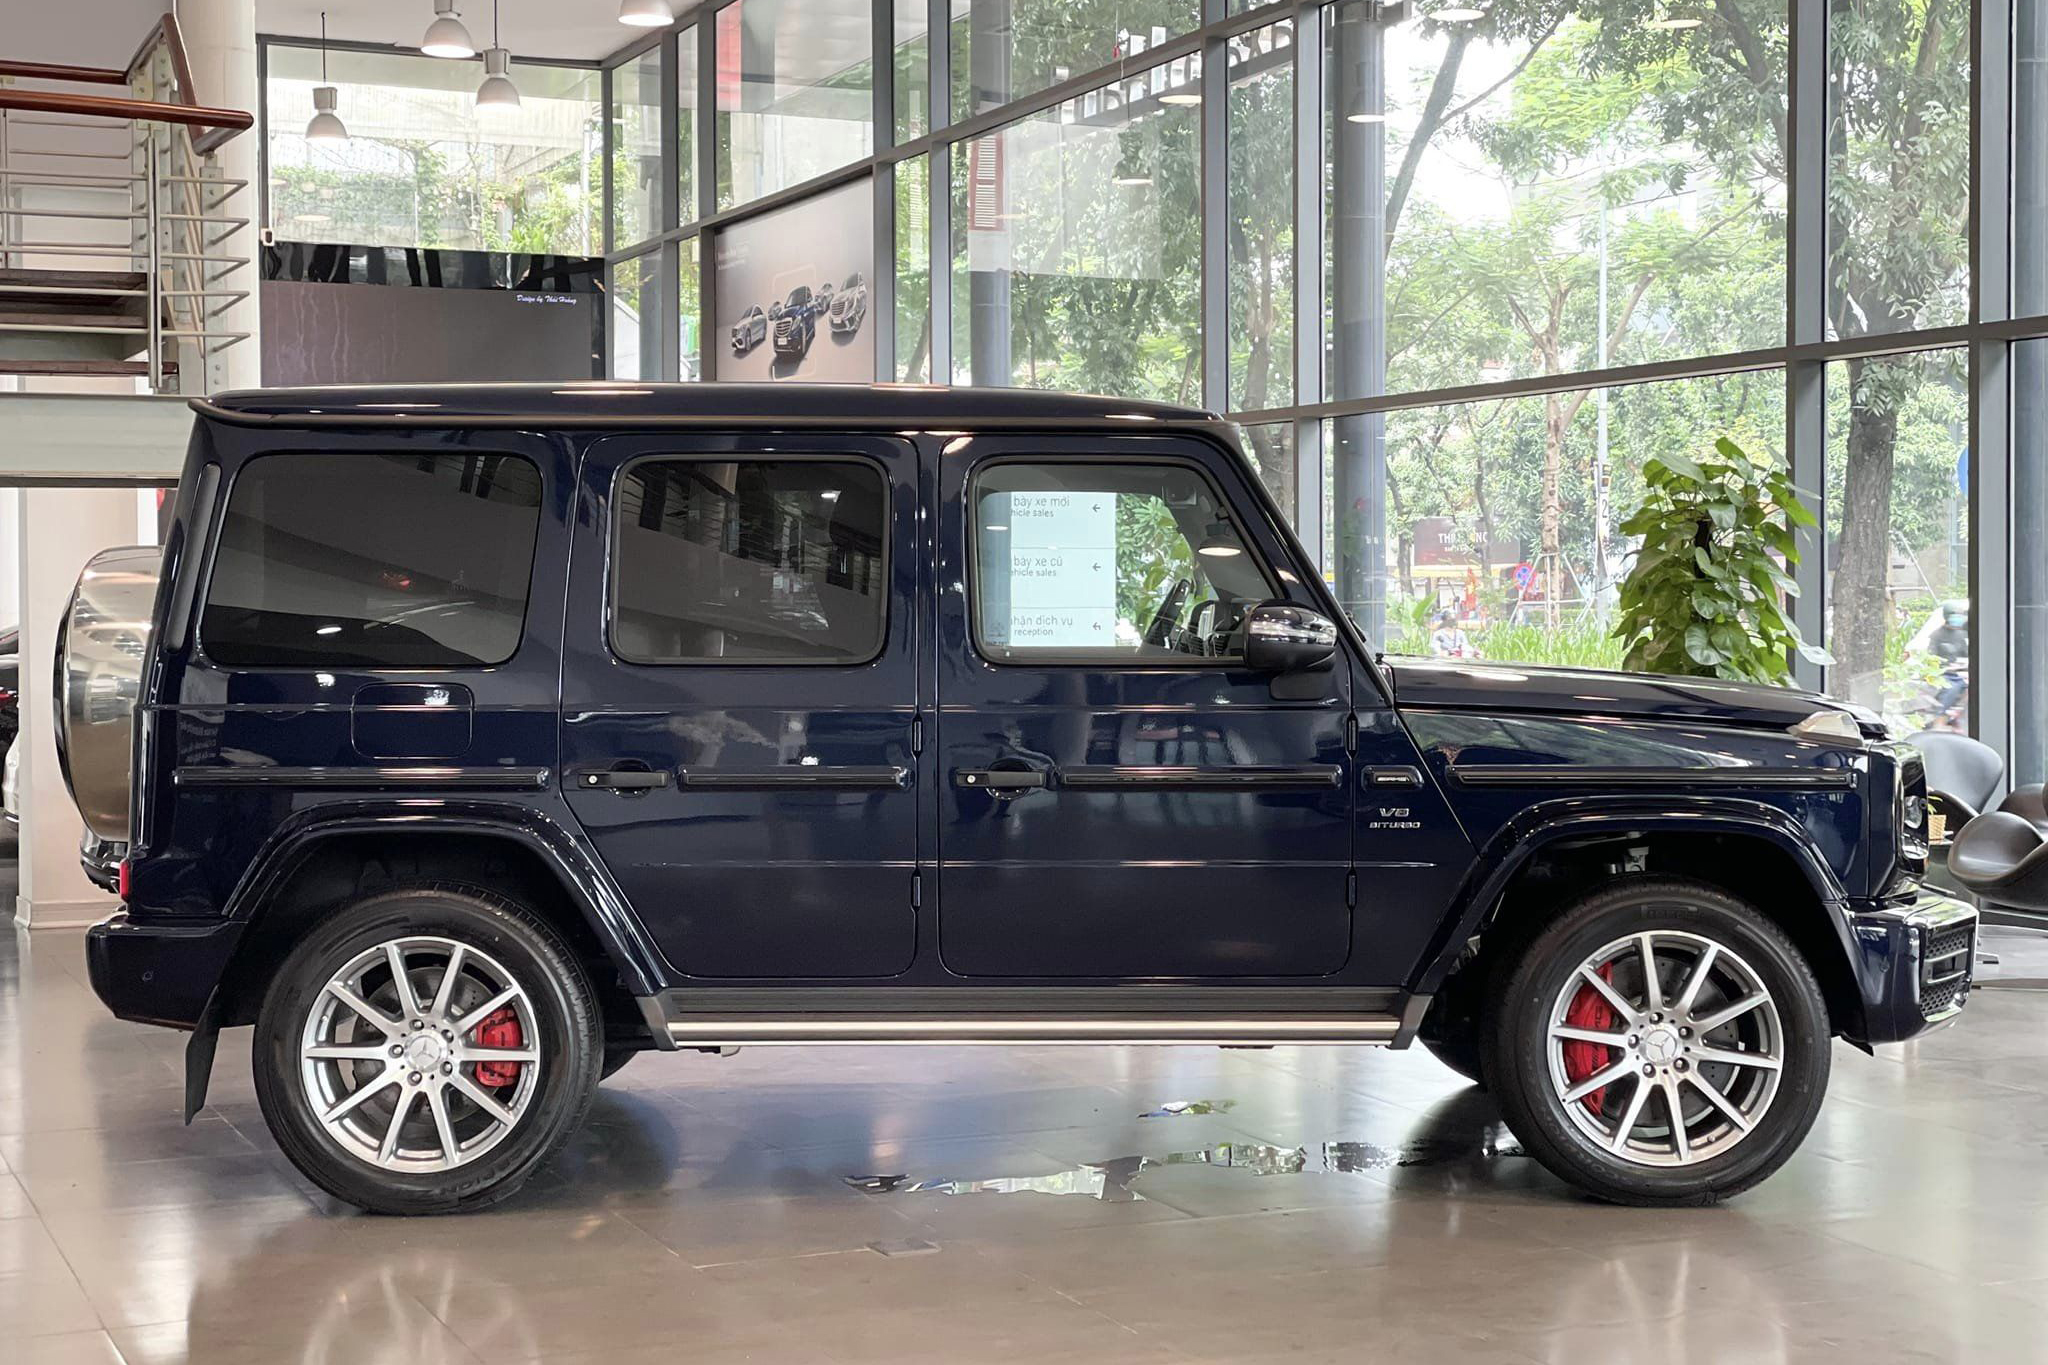 mercedes-amg-g-63-phan-phoi-chinh-hang-cafeautovn-17